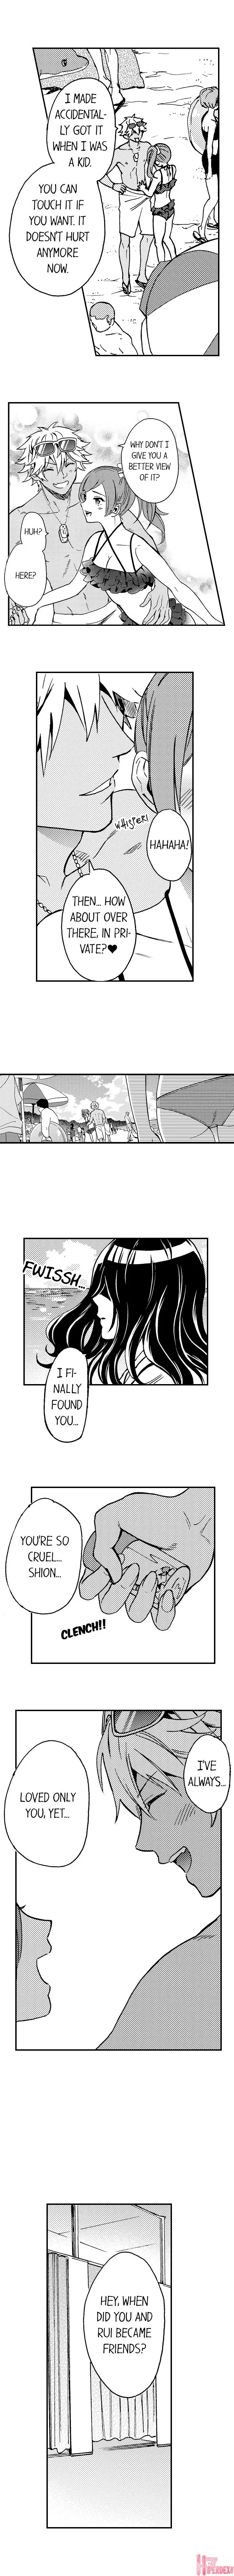 Fucked by My Best Friend - Chapter 1 Page 4